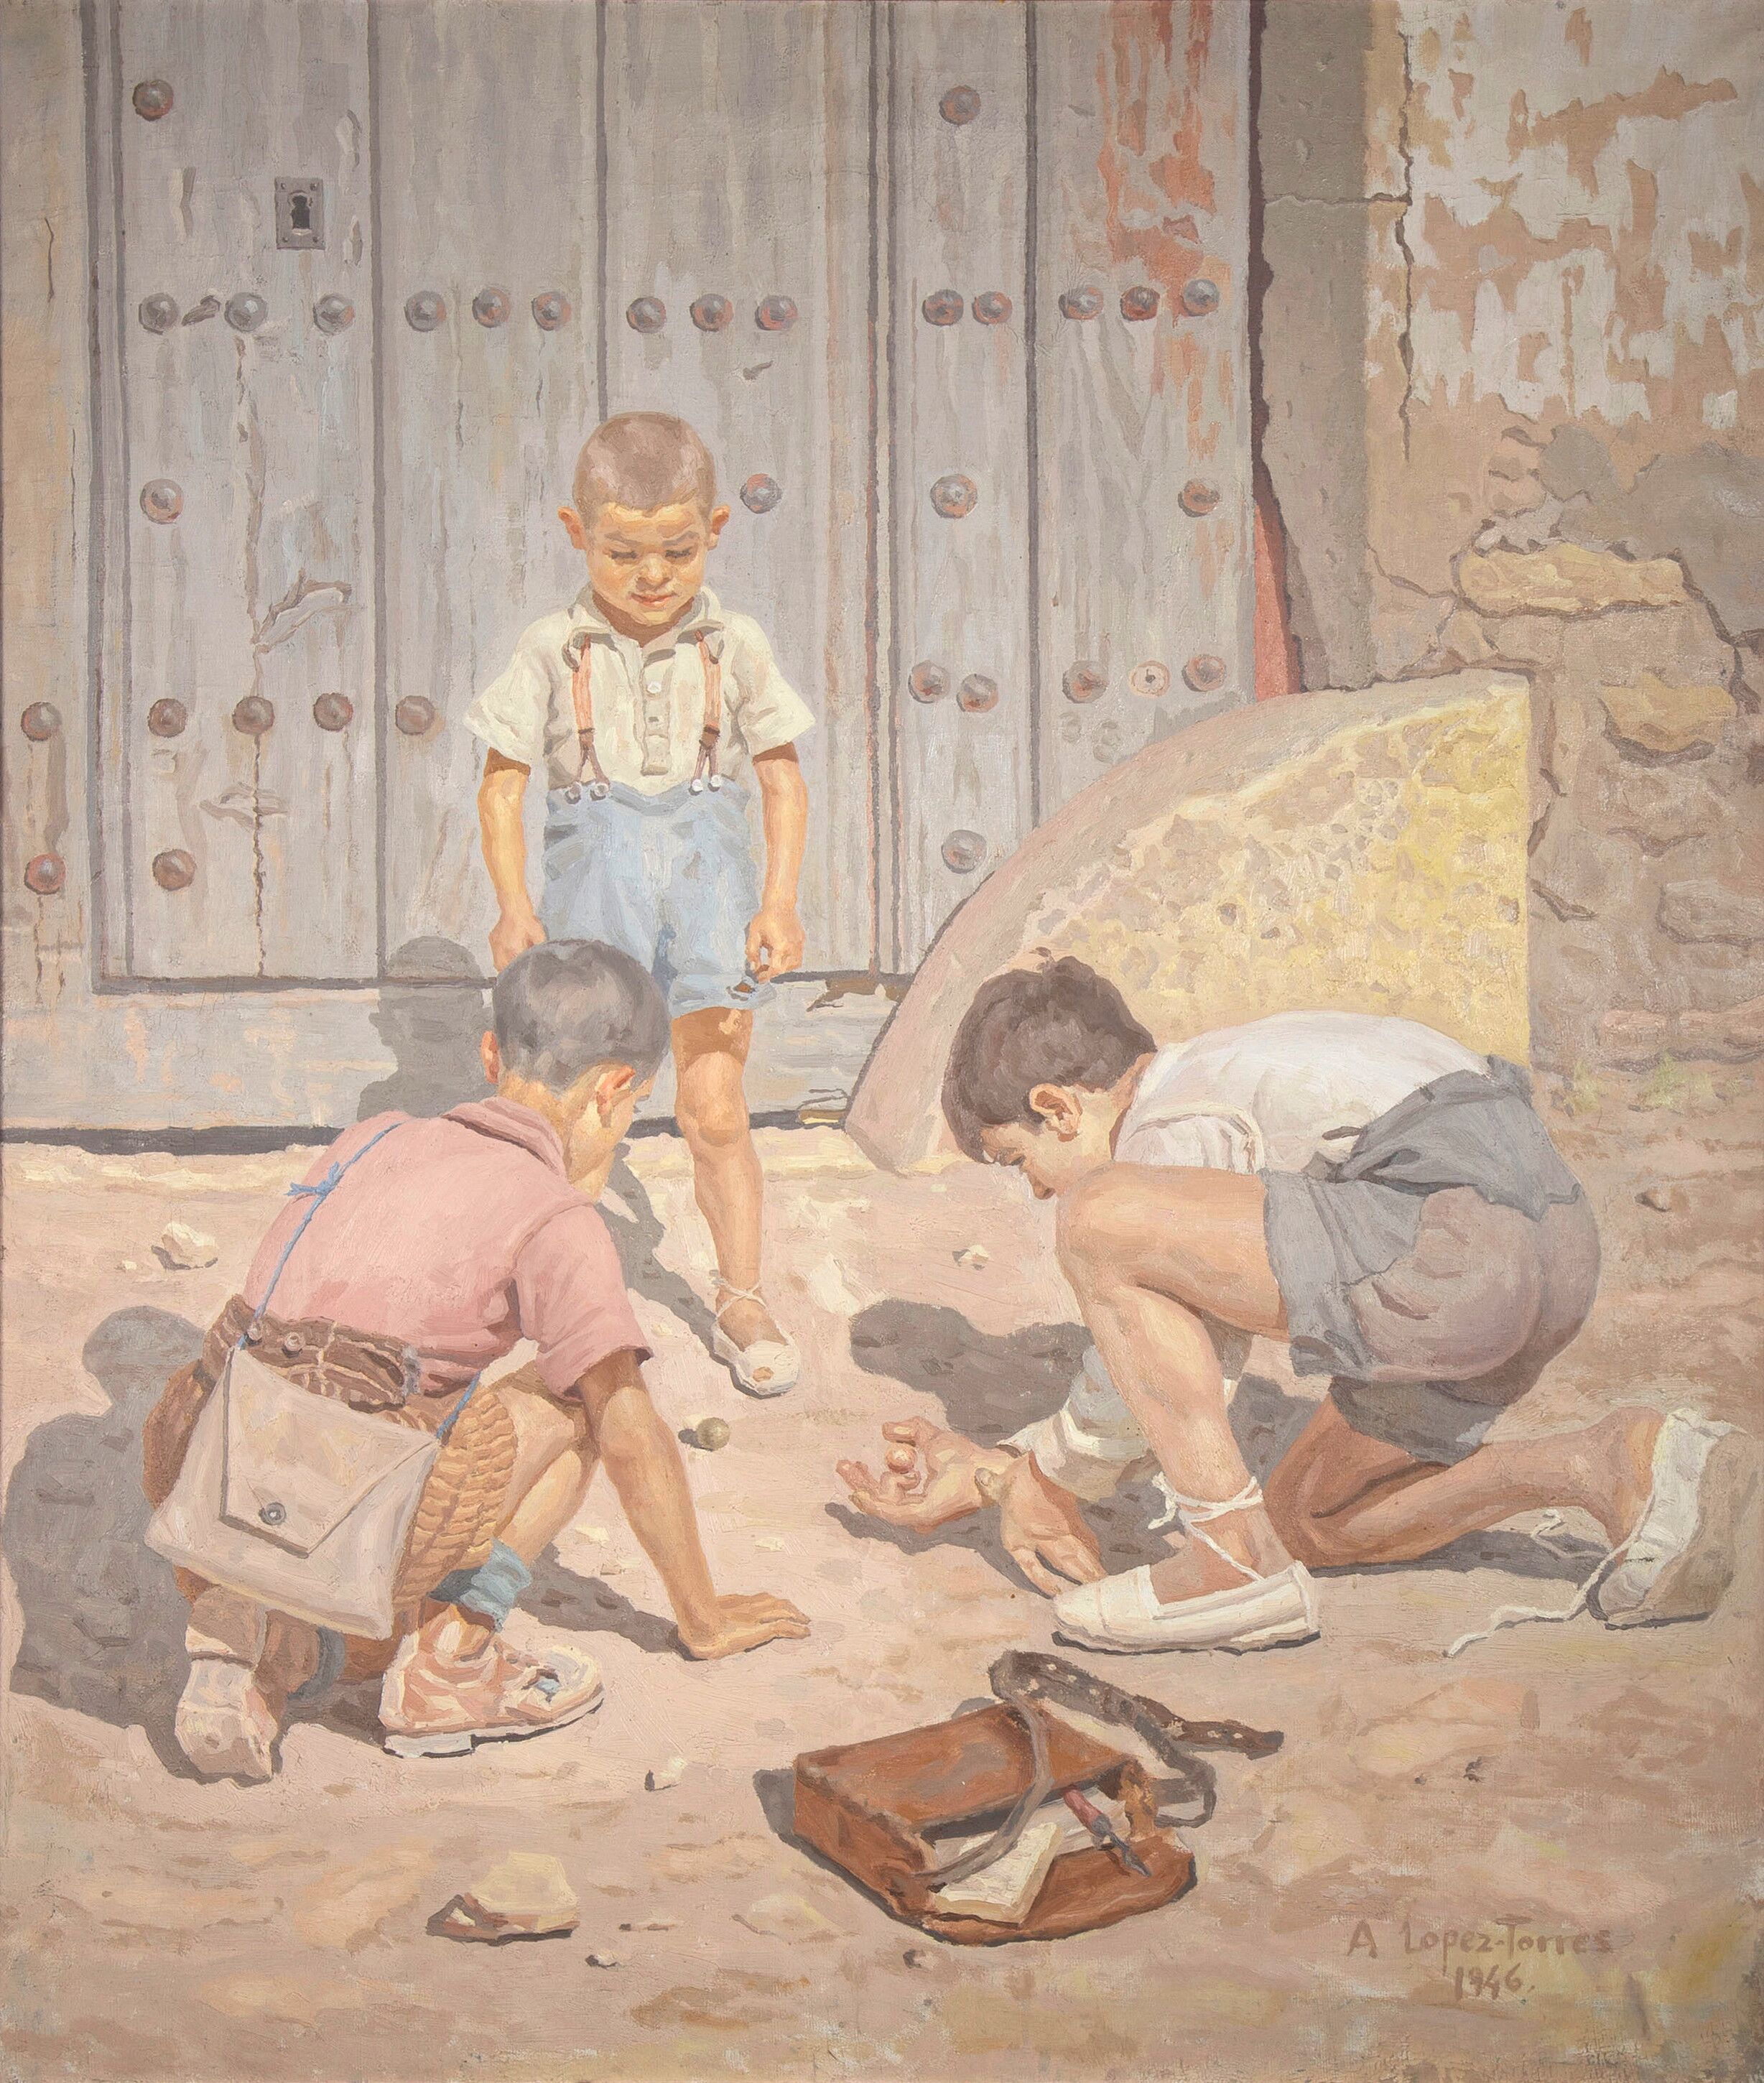 Boys playing with marbles